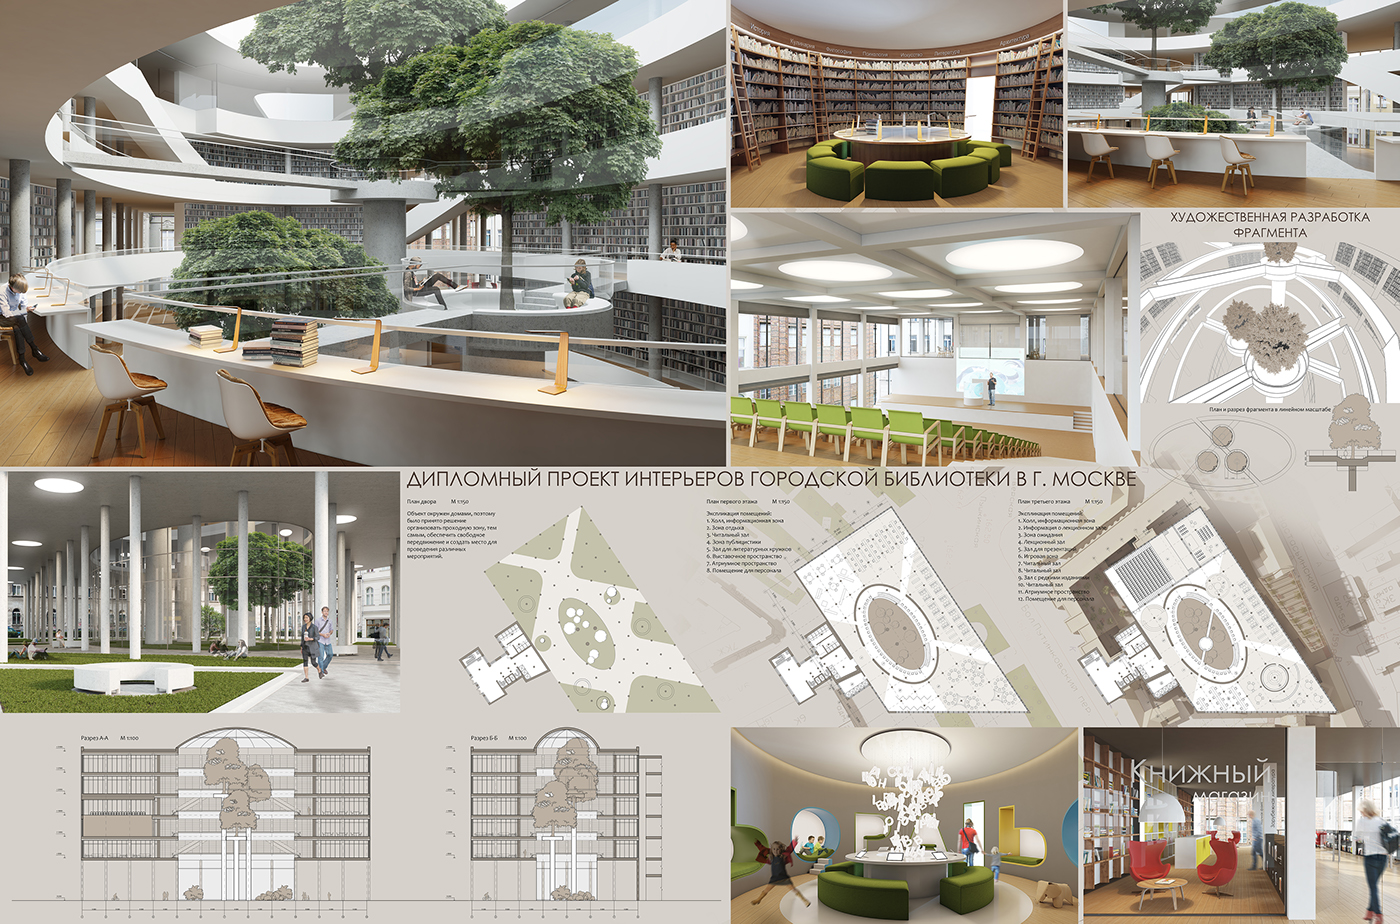 architectural thesis on library design